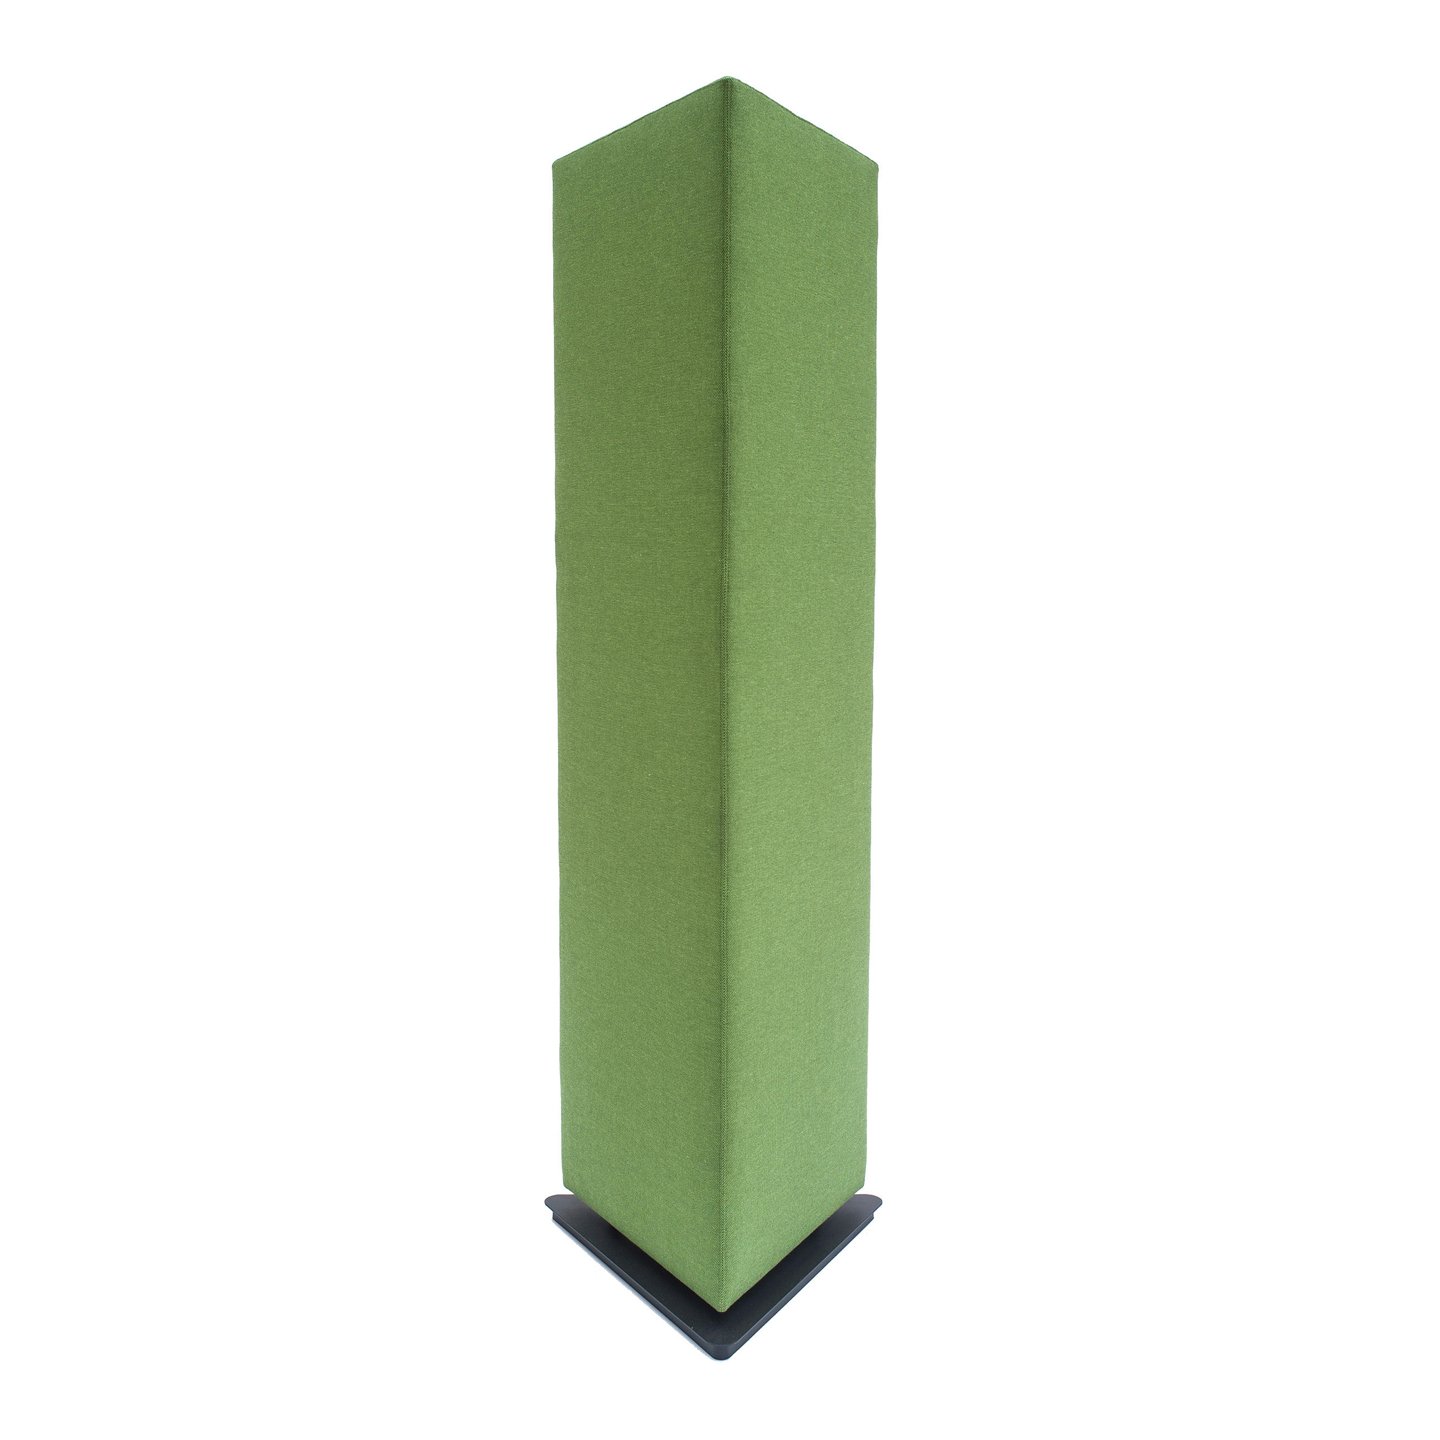 Haworth BuzziTotem Screen in green color and triangle shape